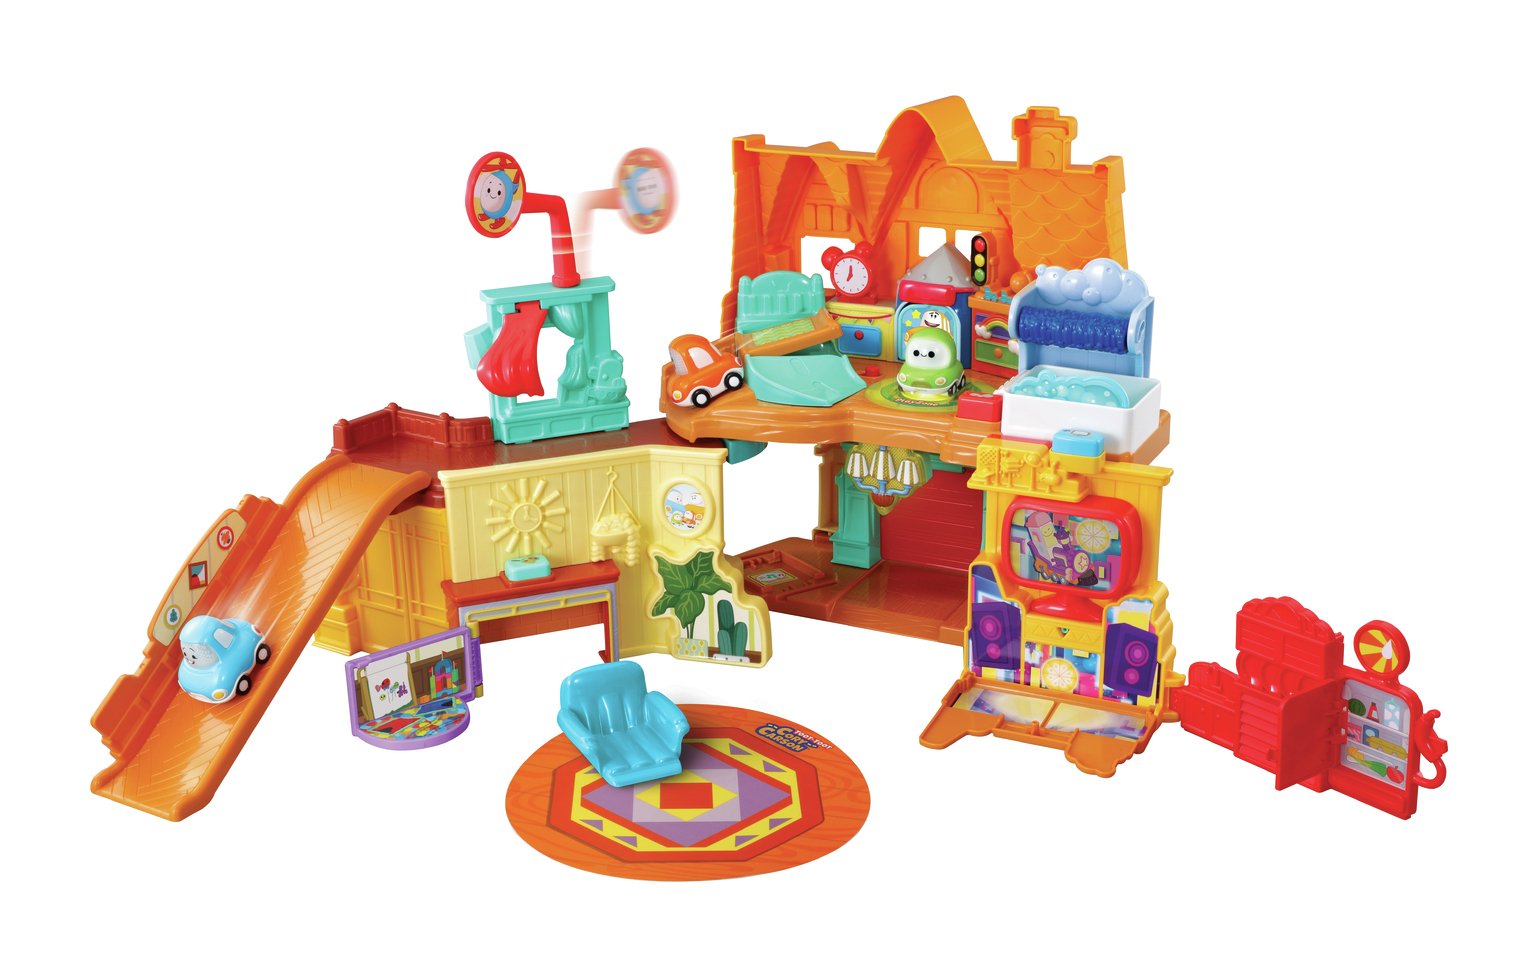 VTech Toot-Toot Cory Carson Cory's Stay & Play Playset Review